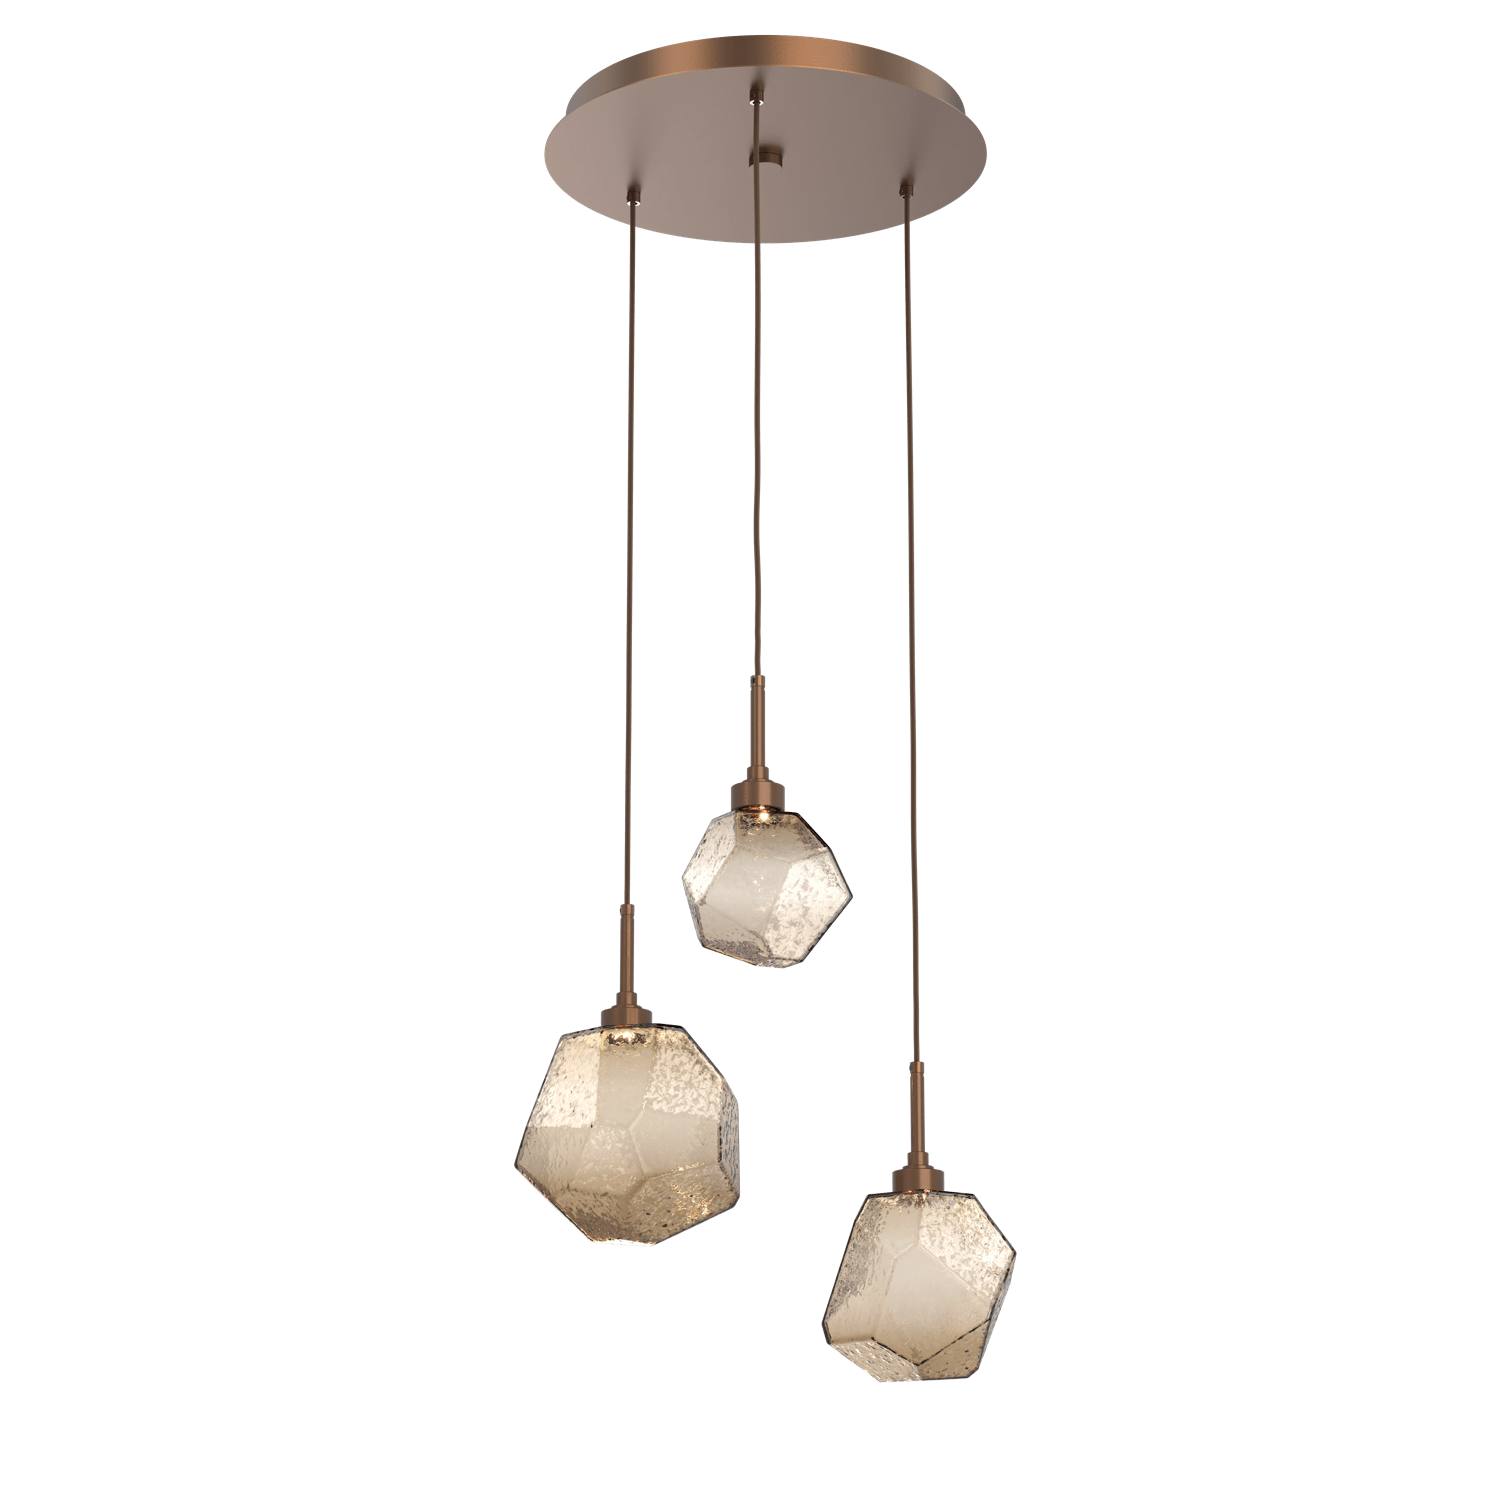 CHB0039-03-BB-B-Hammerton-Studio-Gem-3-light-round-pendant-chandelier-with-burnished-bronze-finish-and-bronze-blown-glass-shades-and-LED-lamping